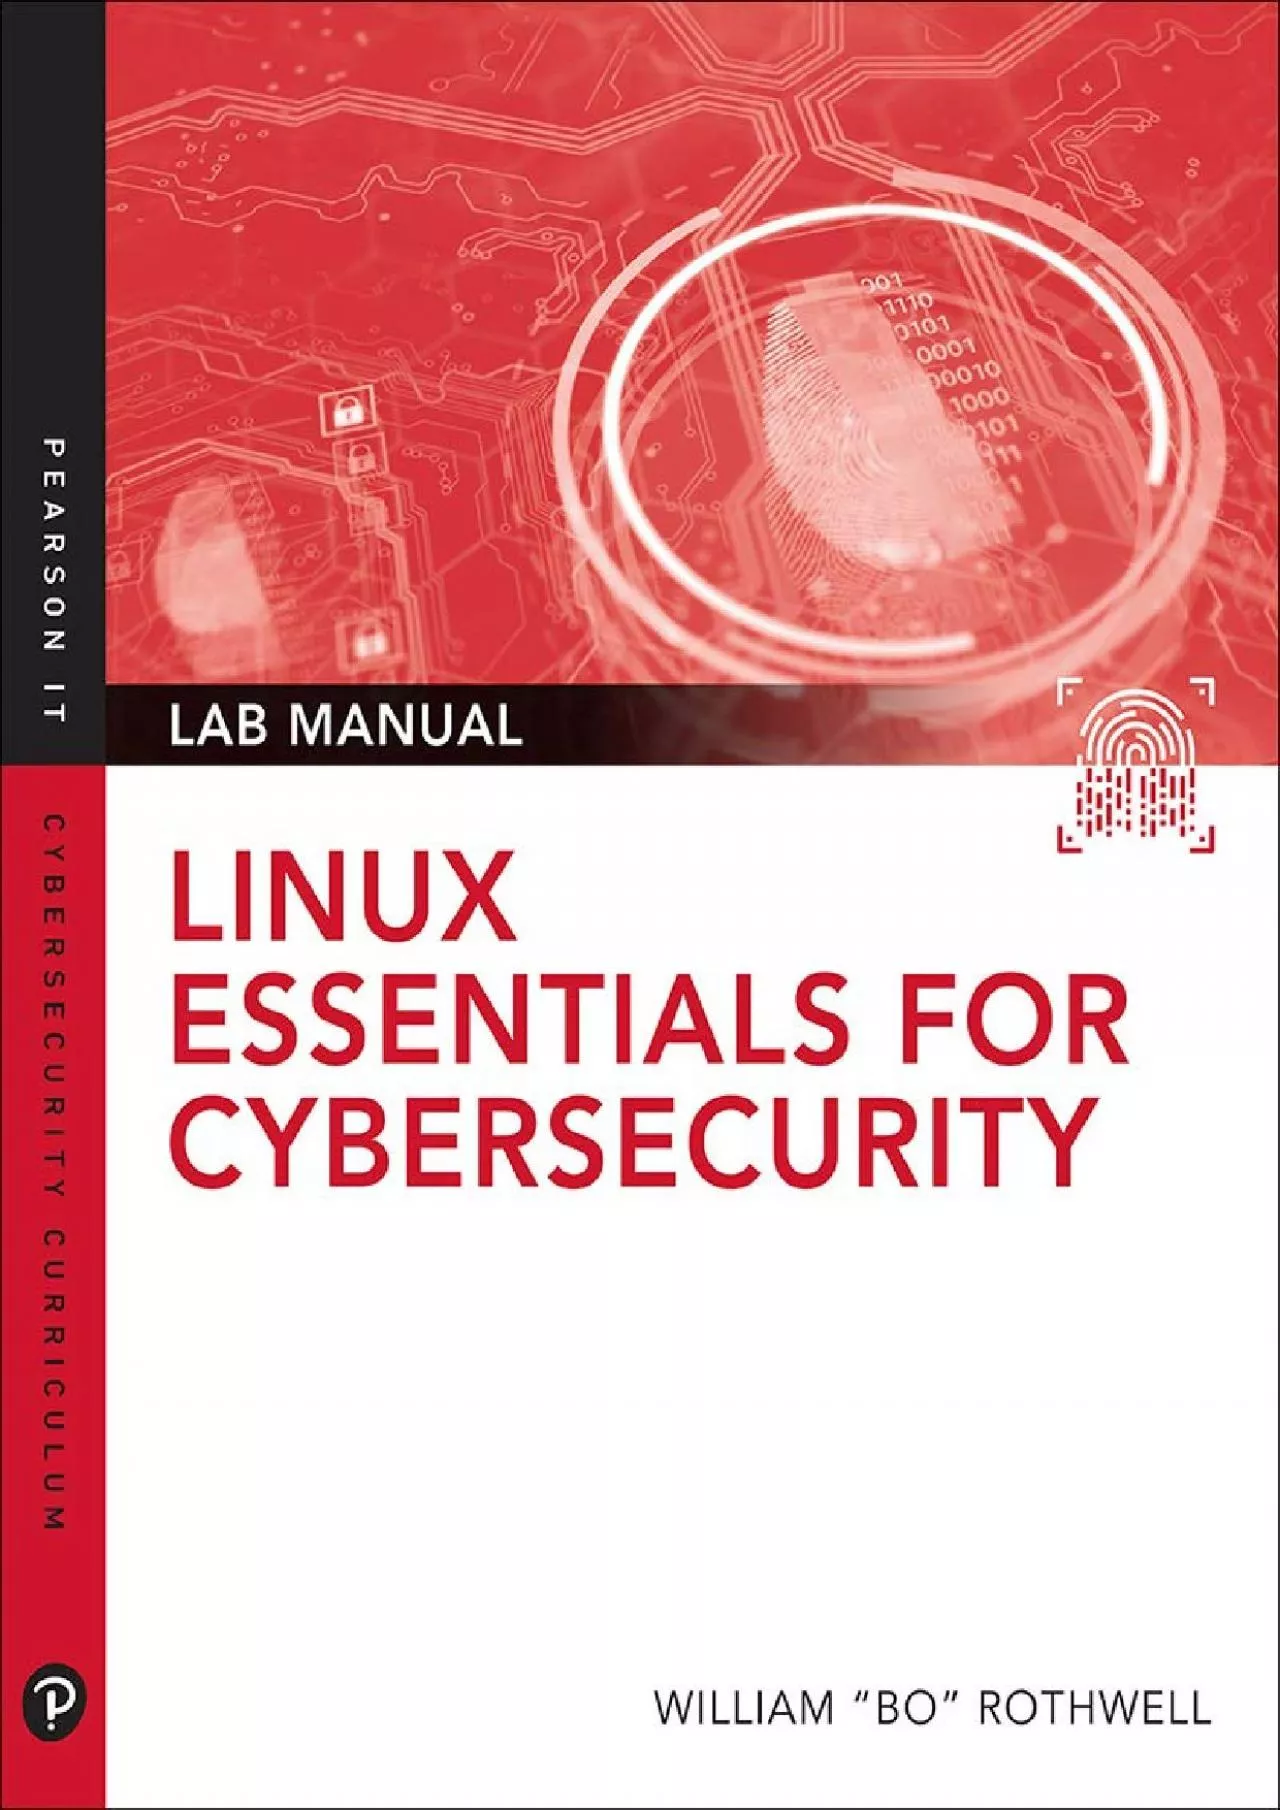 [eBOOK]-Linux Essentials for Cybersecurity Lab Manual (Pearson IT Cybersecurity Curriculum